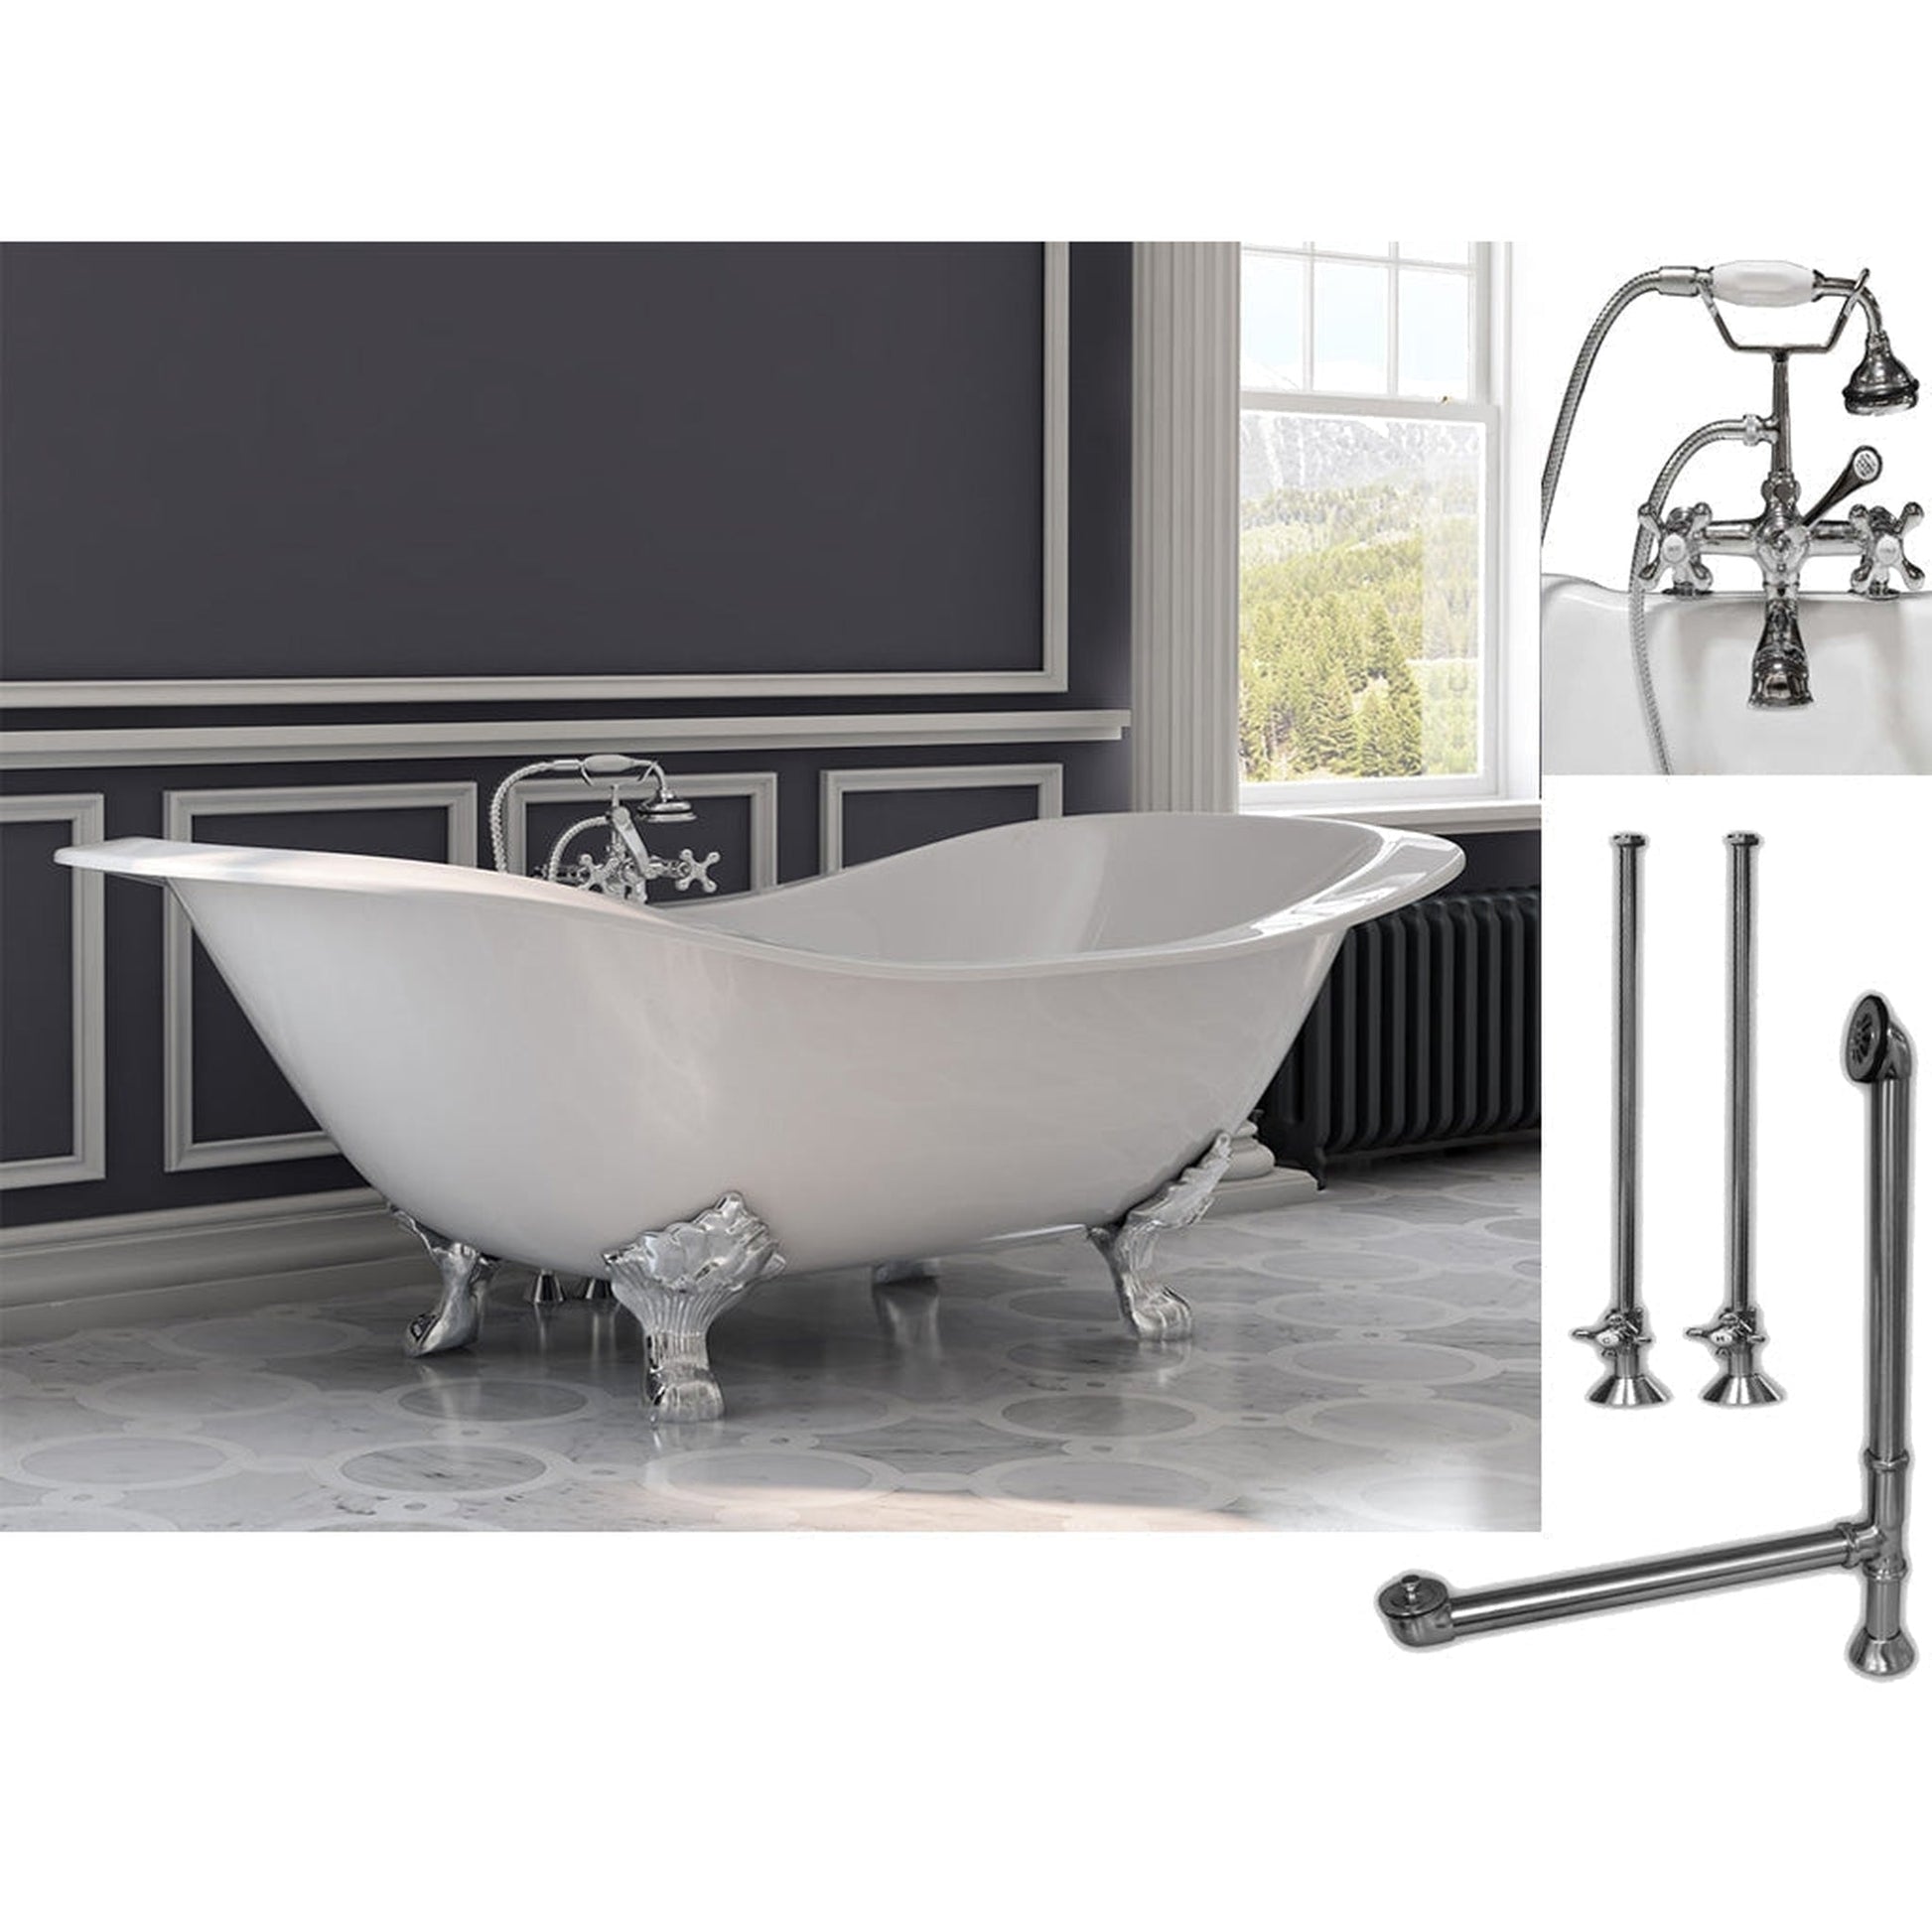 Cambridge Plumbing 72" White Cast Iron Double Slipper Clawfoot Bathtub With Deck Holes And Complete Plumbing Package Including 2” Riser Deck Mount Faucet, Supply Lines, Drain And Overflow Assembly In Polished Chrome